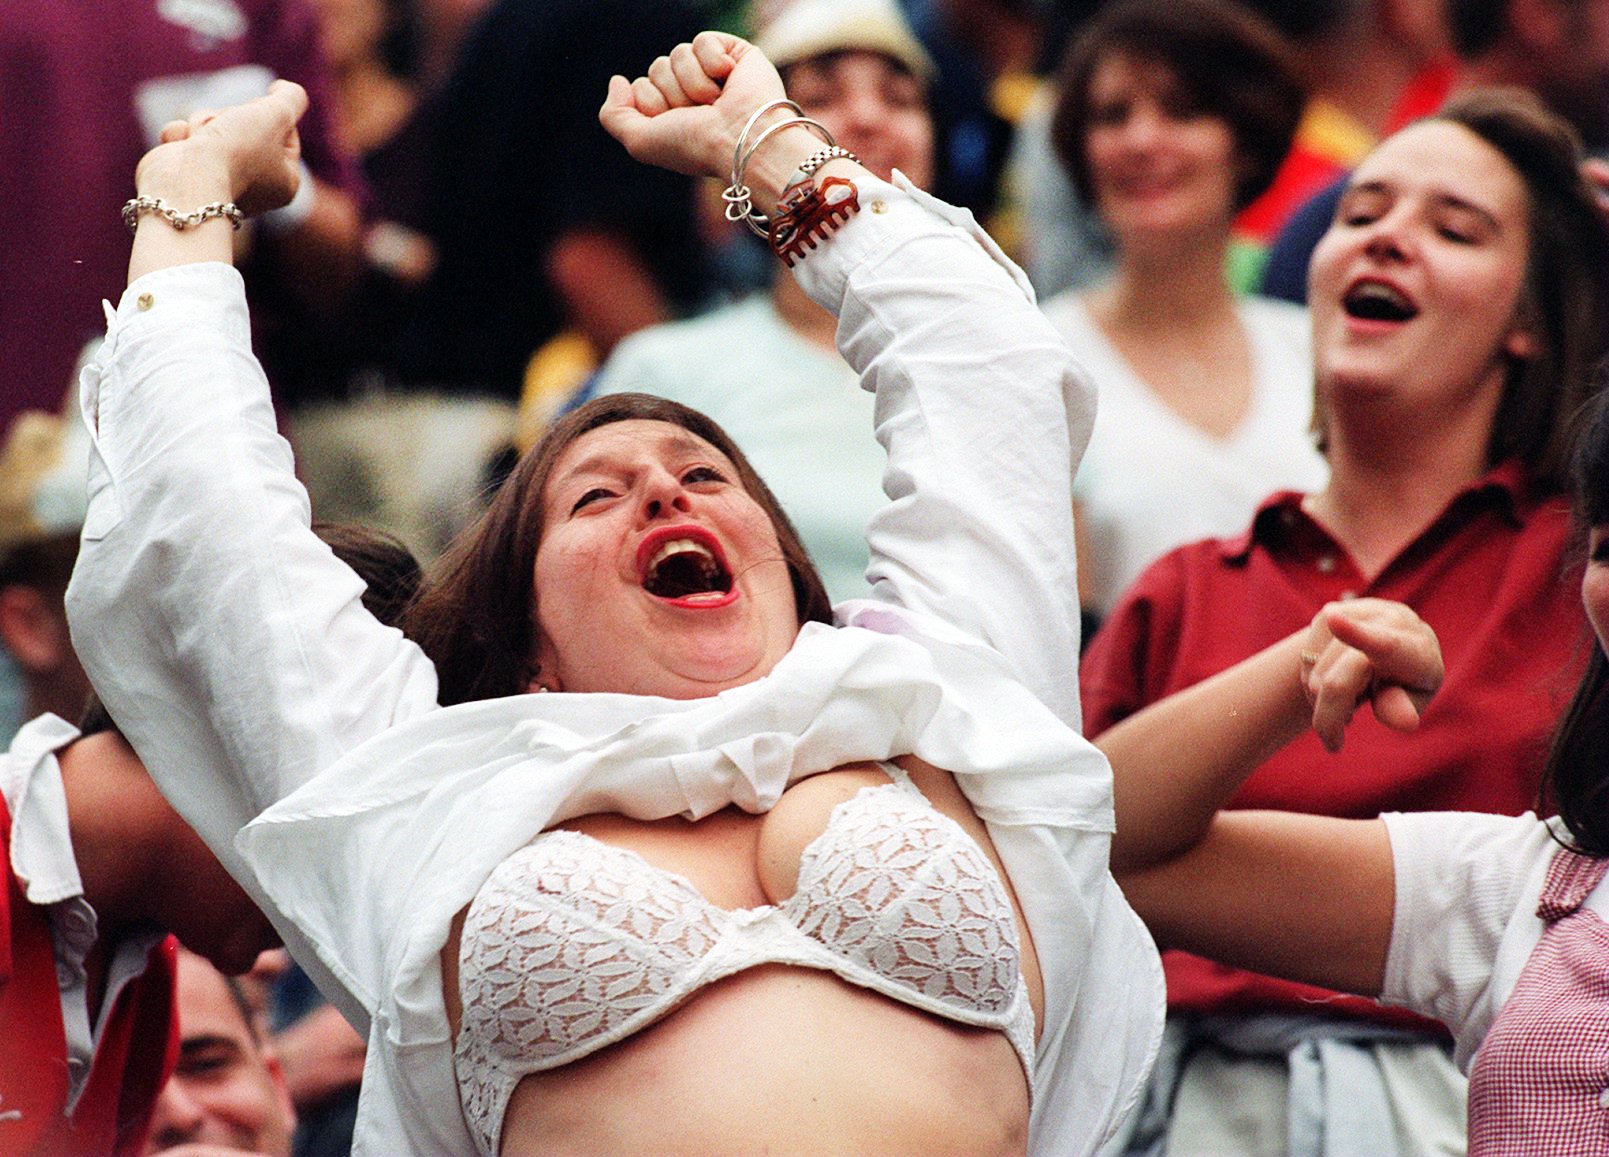 PHOTO 1: Brazen behaviour from a fan in 1996. Is this you? Enter to win tickets to this year's Sevens.